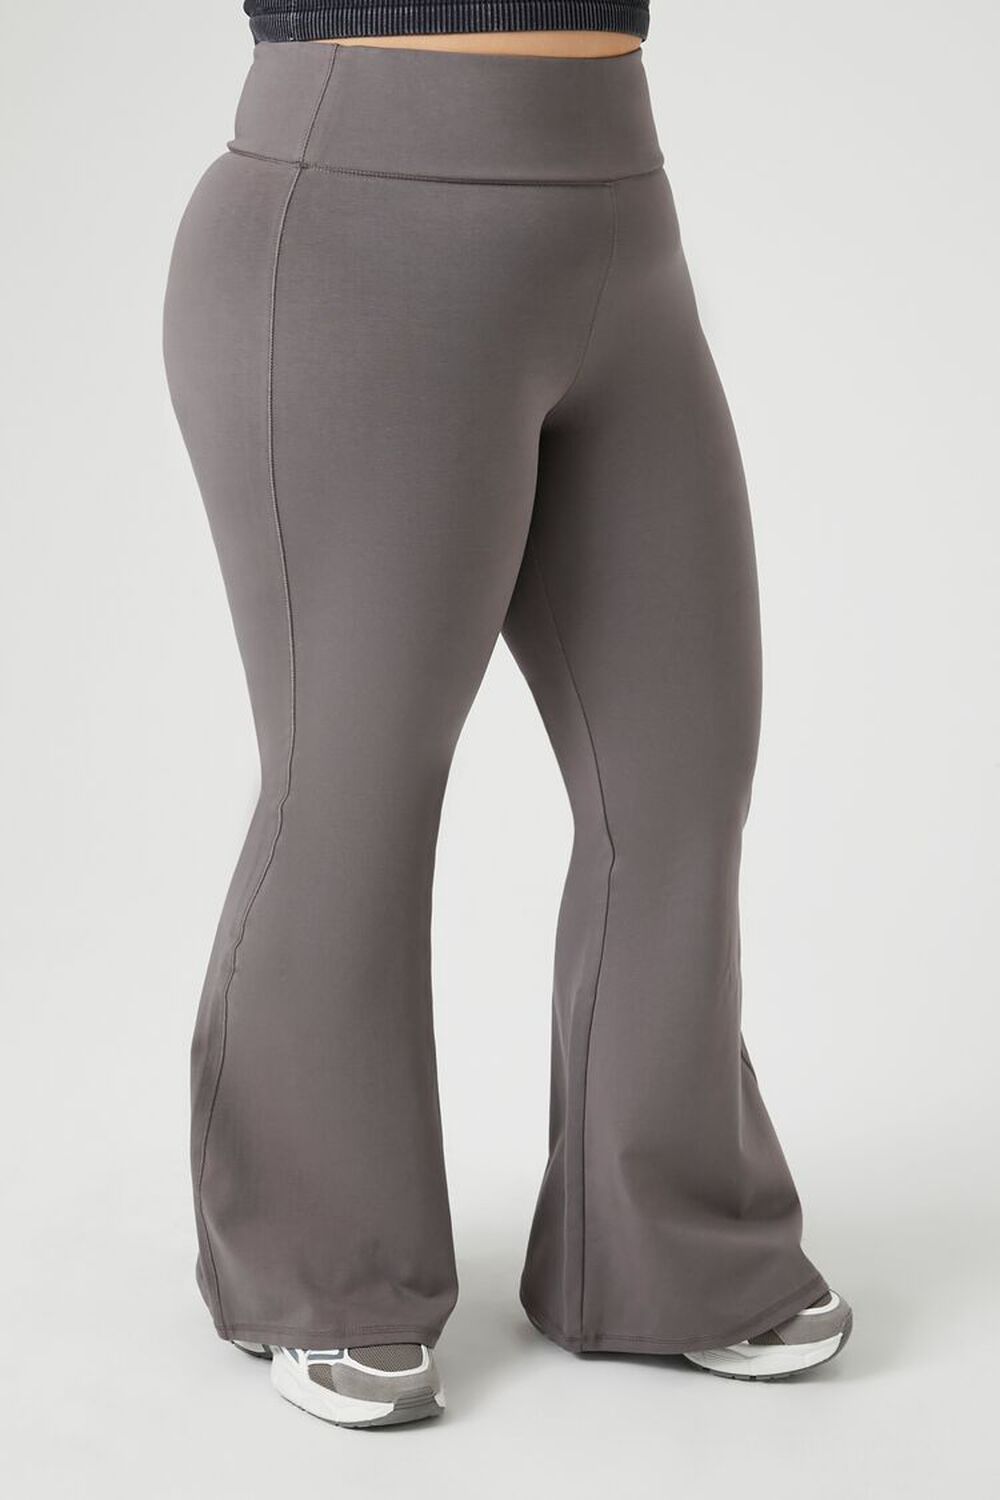 Solid color plus size high rise flare leggings. Inseam appro (7303525)